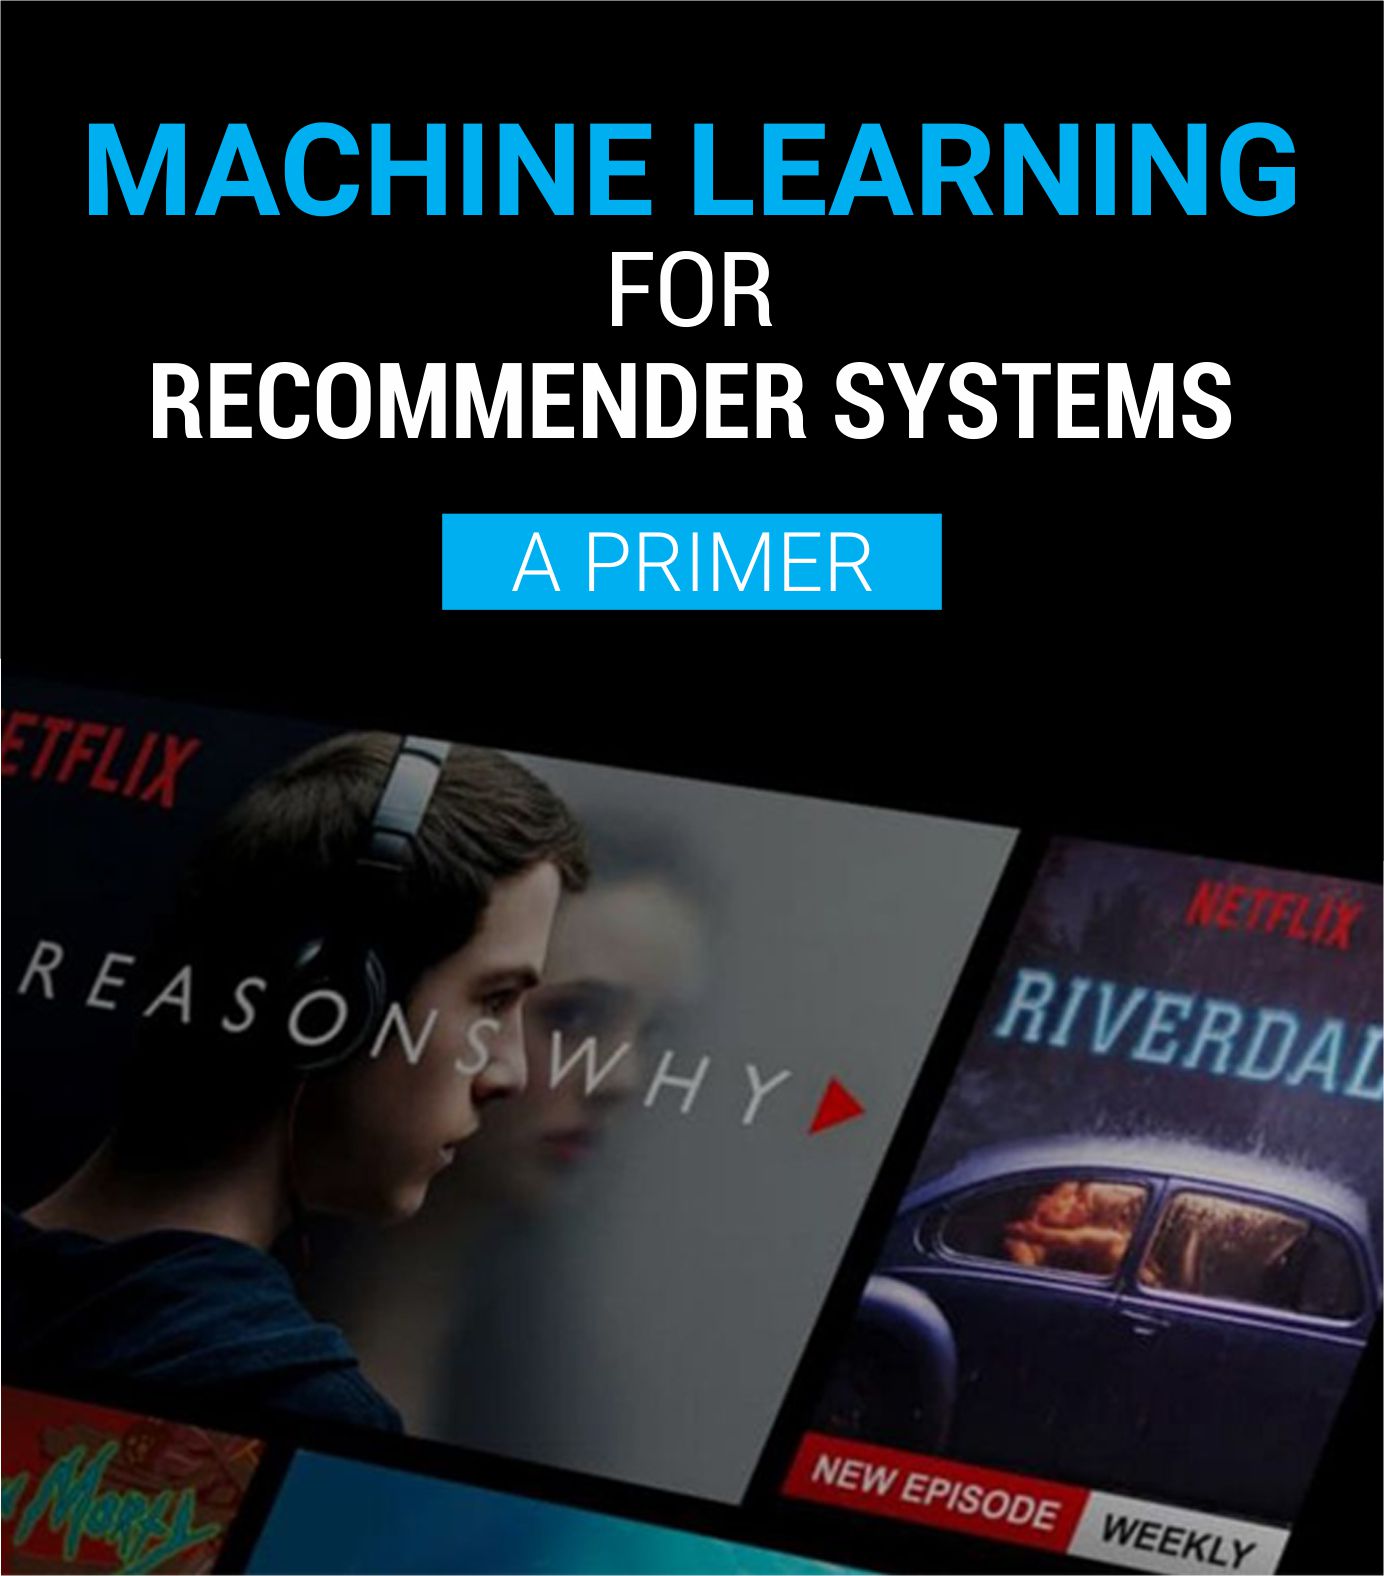 Machine Learning for Recommender Systems - A Primer